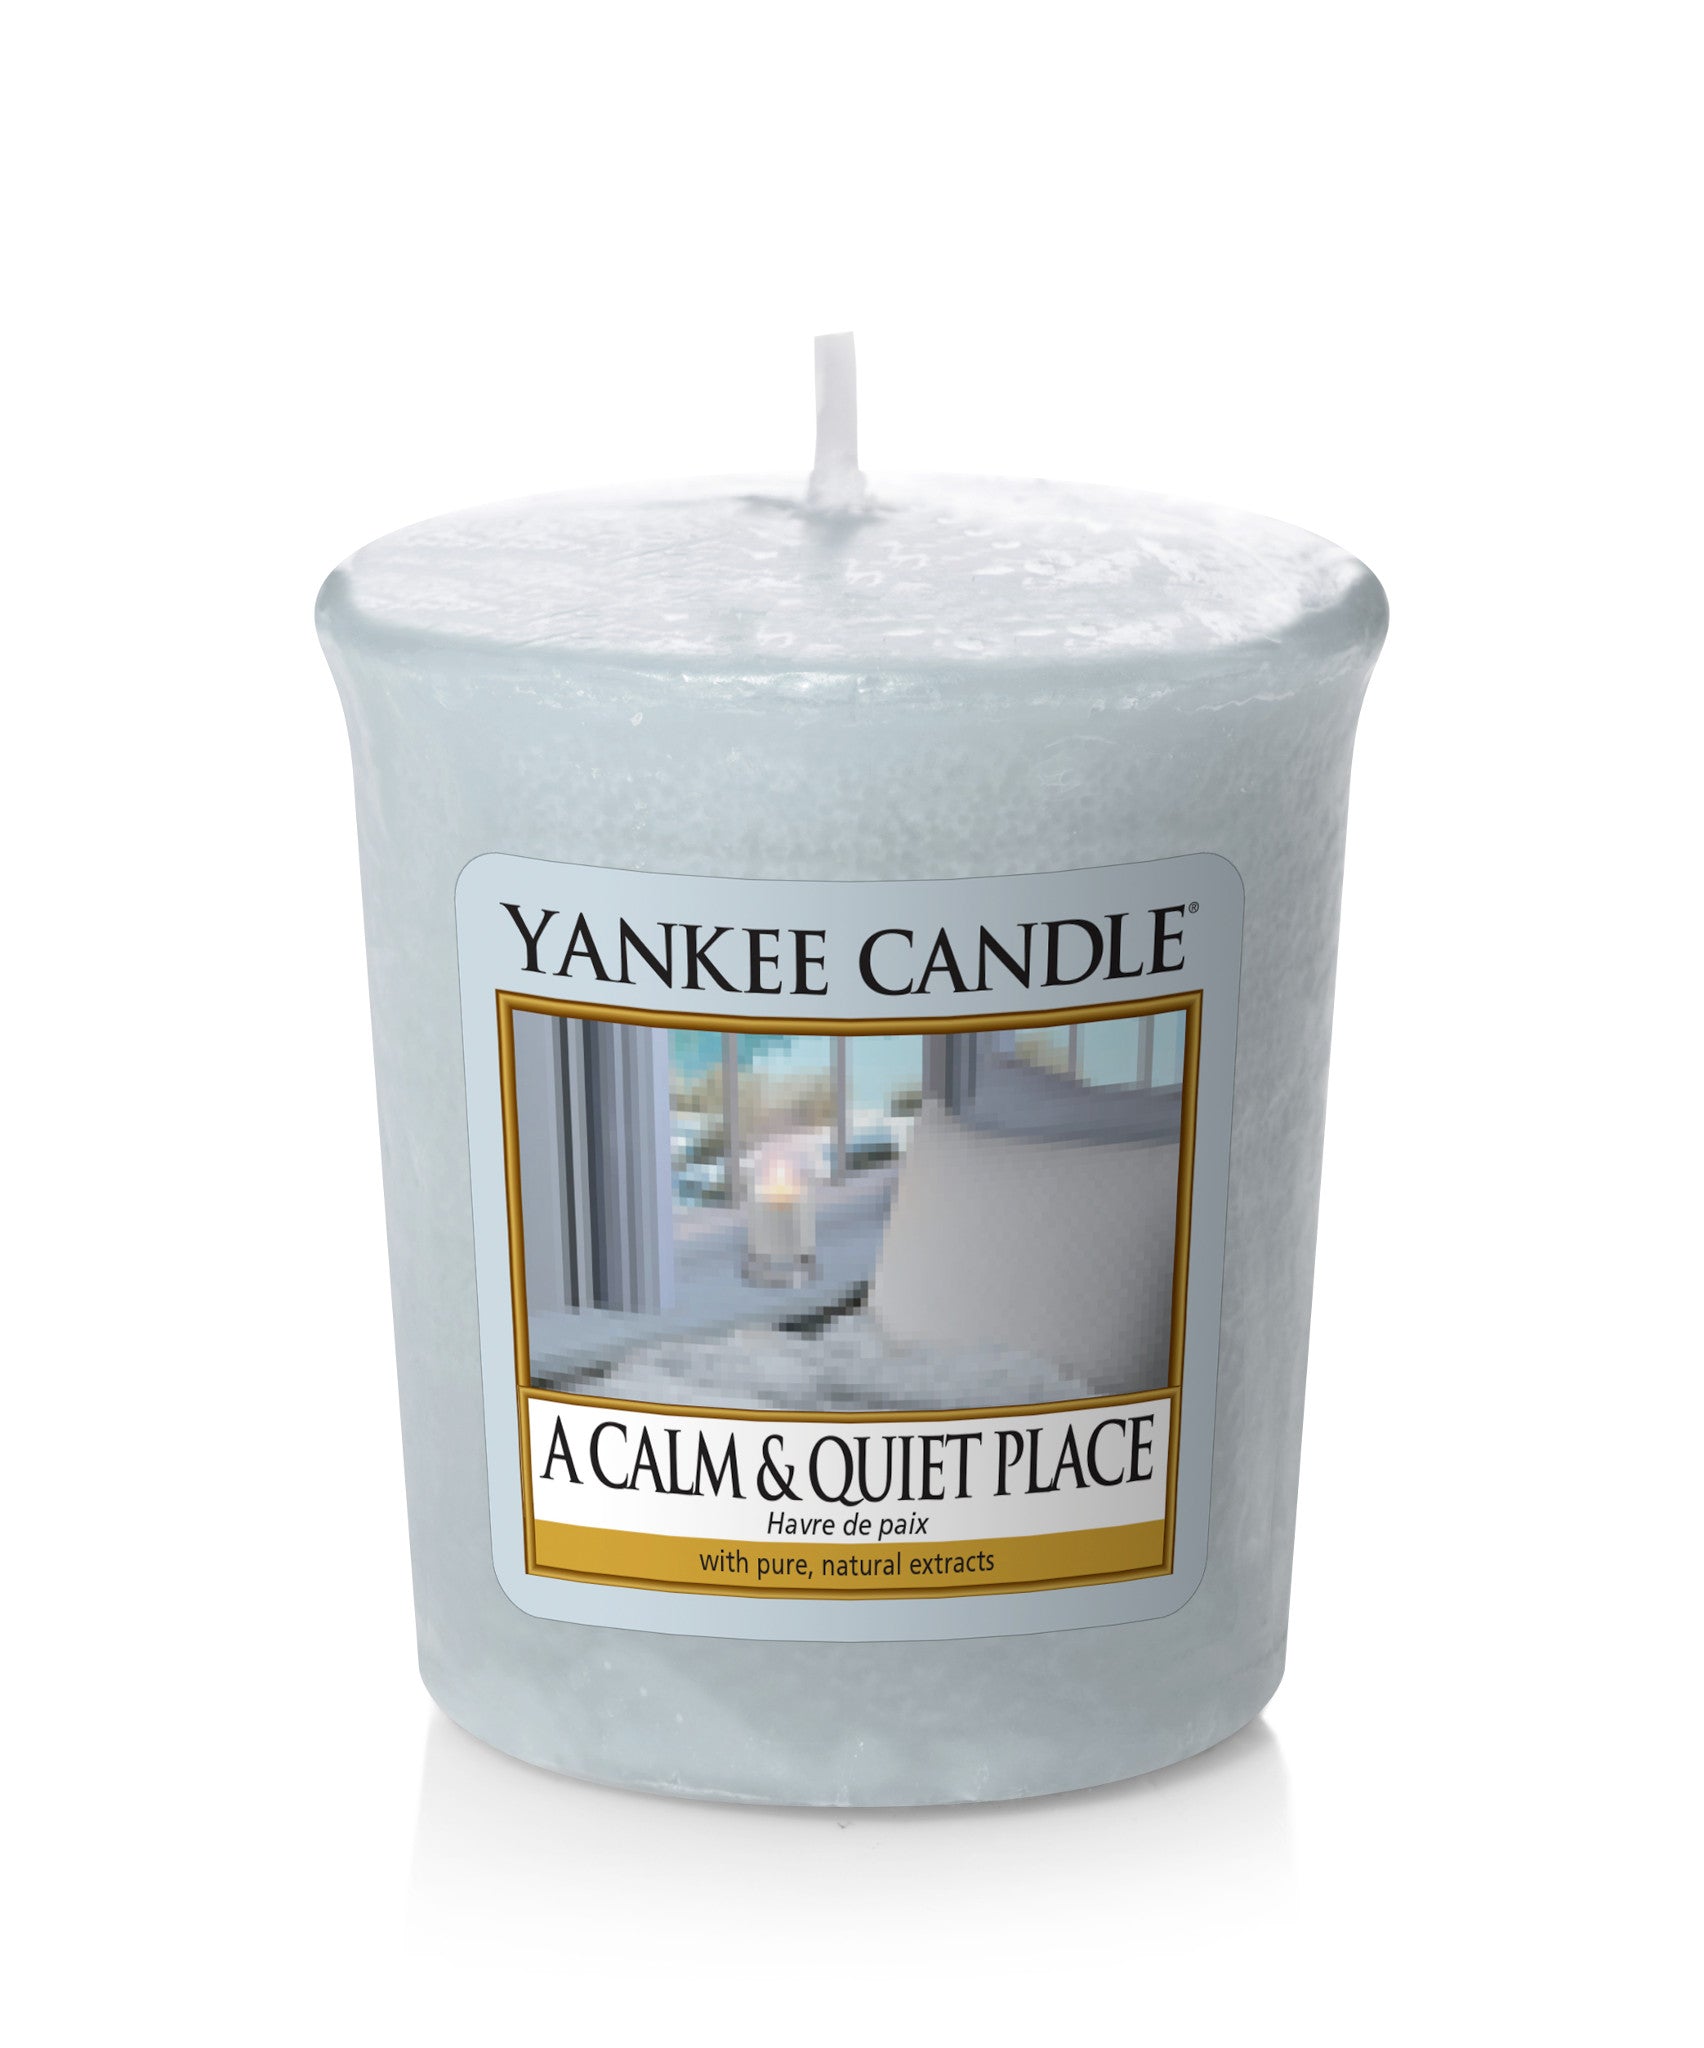 A CALM & QUIET PLACE -Yankee Candle- Candela Sampler